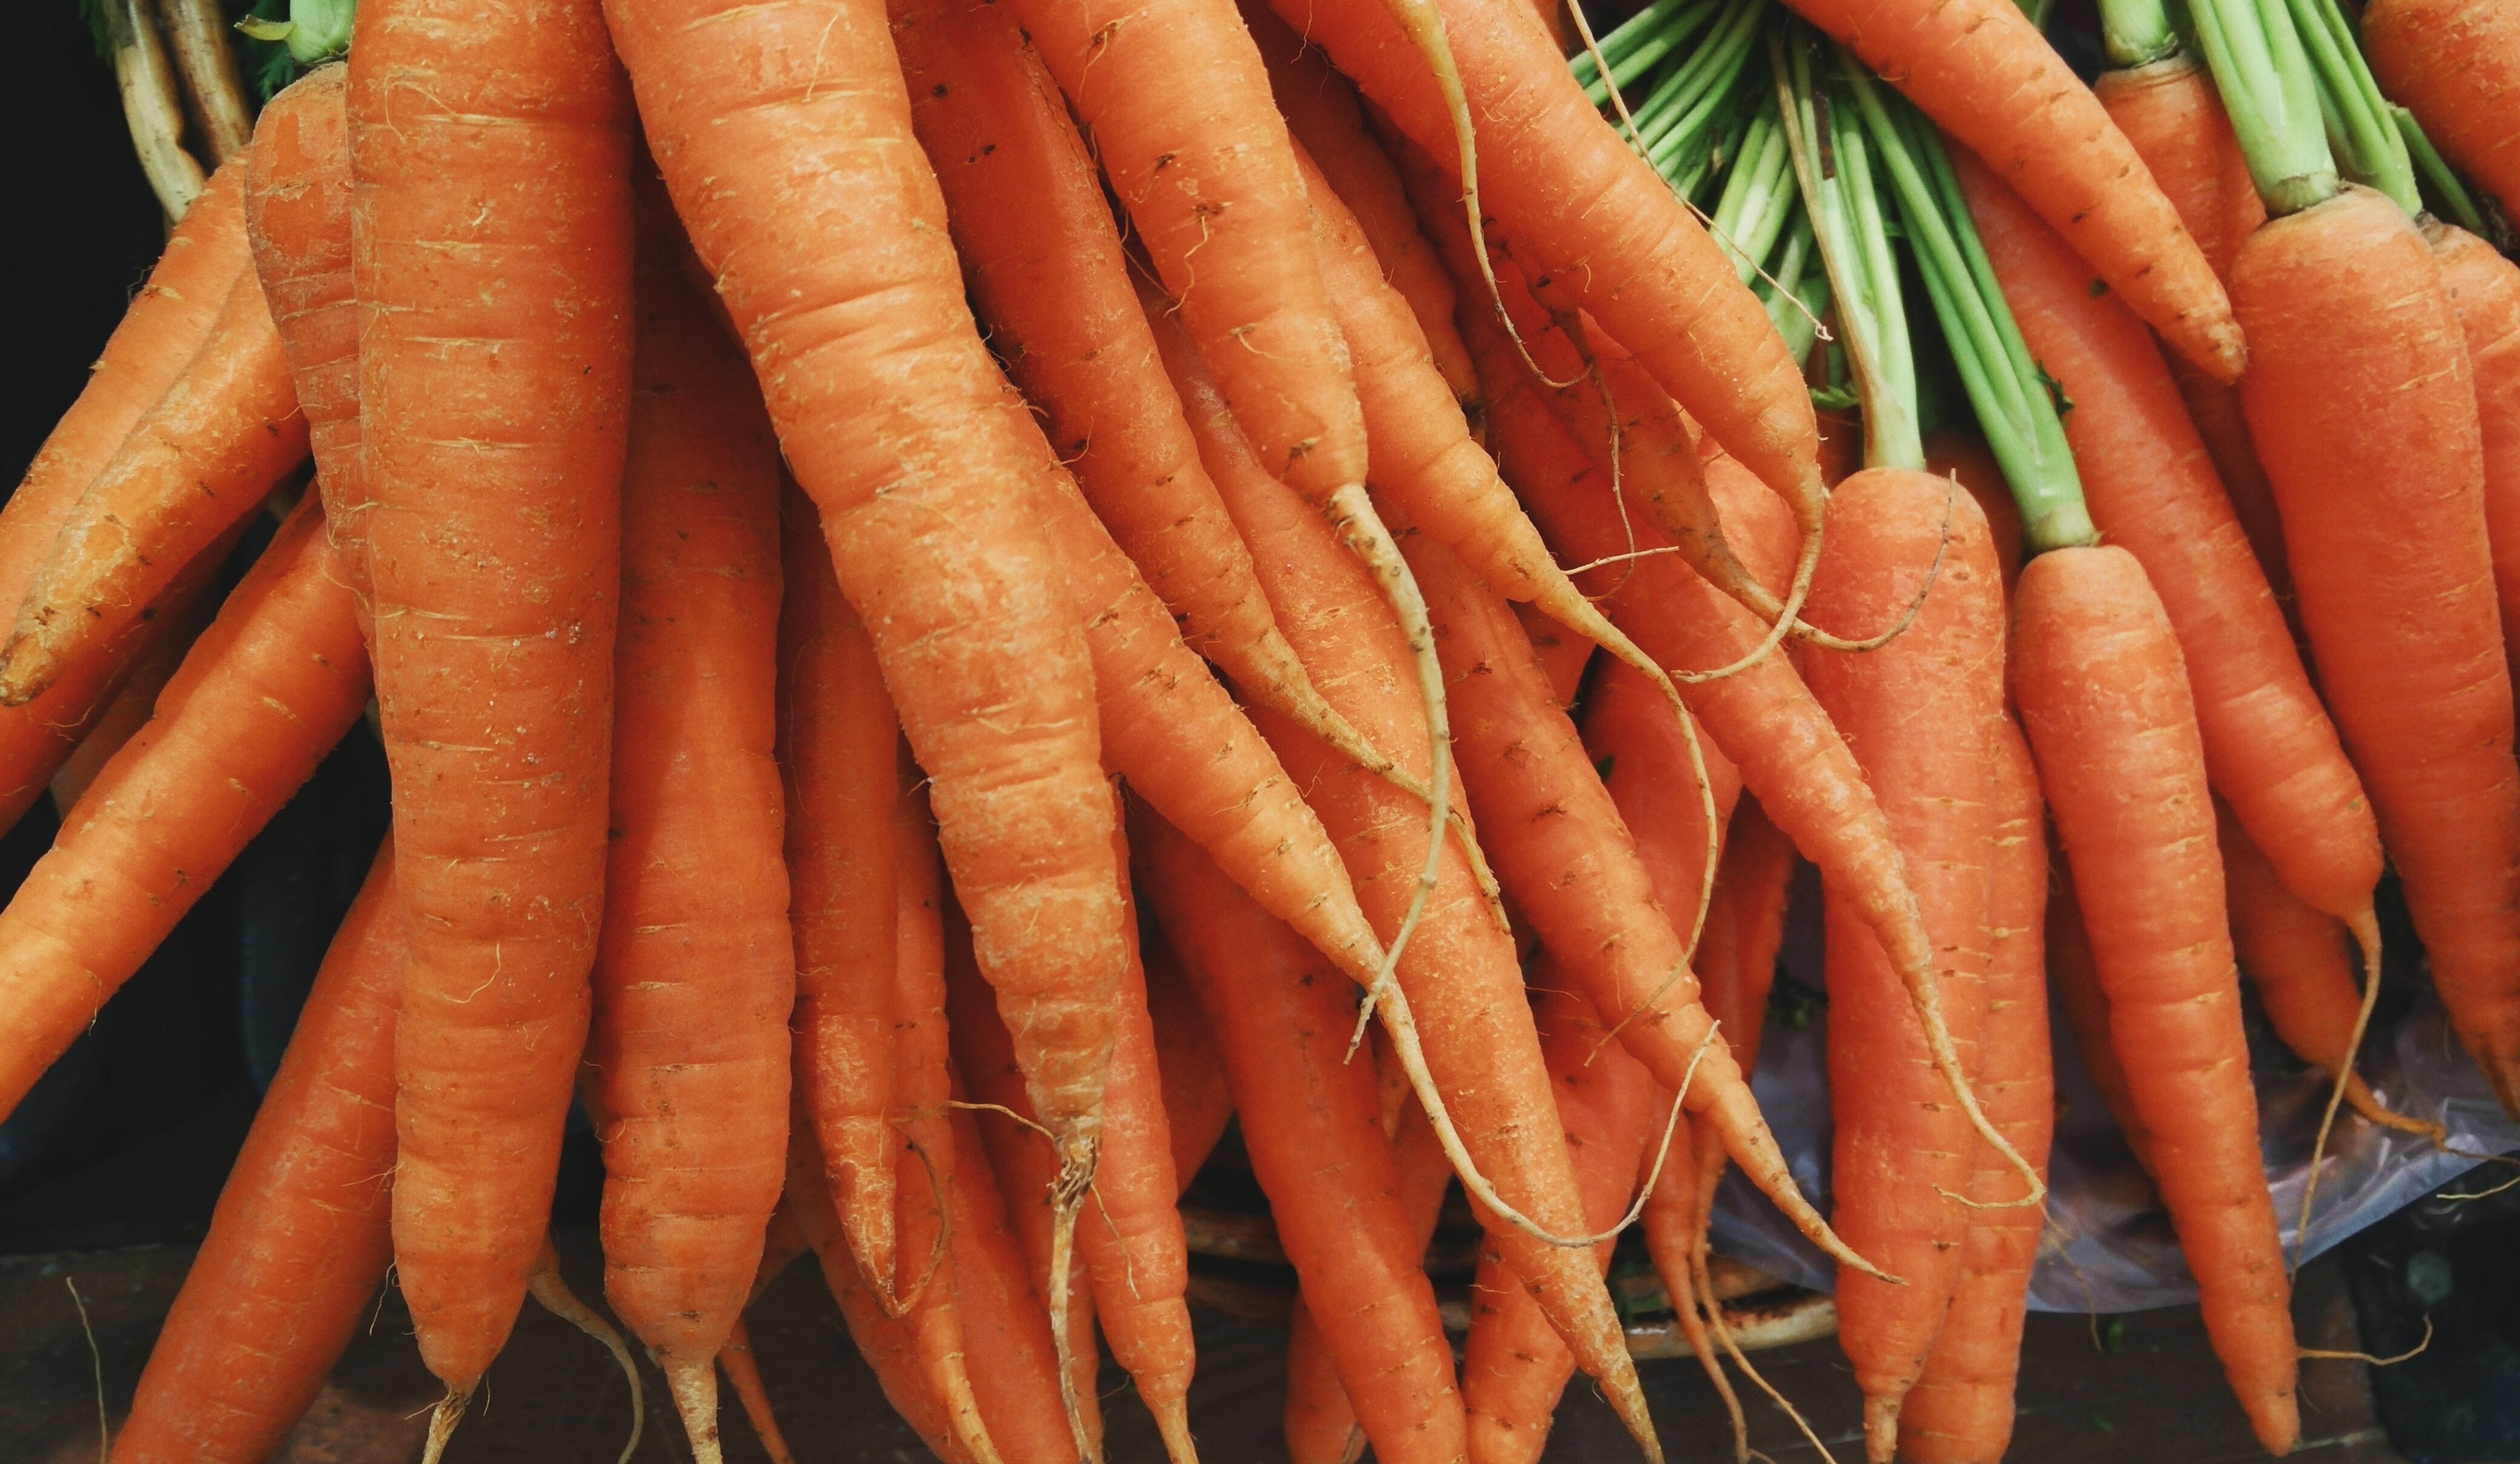 Carrots from a local garden donated to Keep Austin Fed to help fight food insecurity 